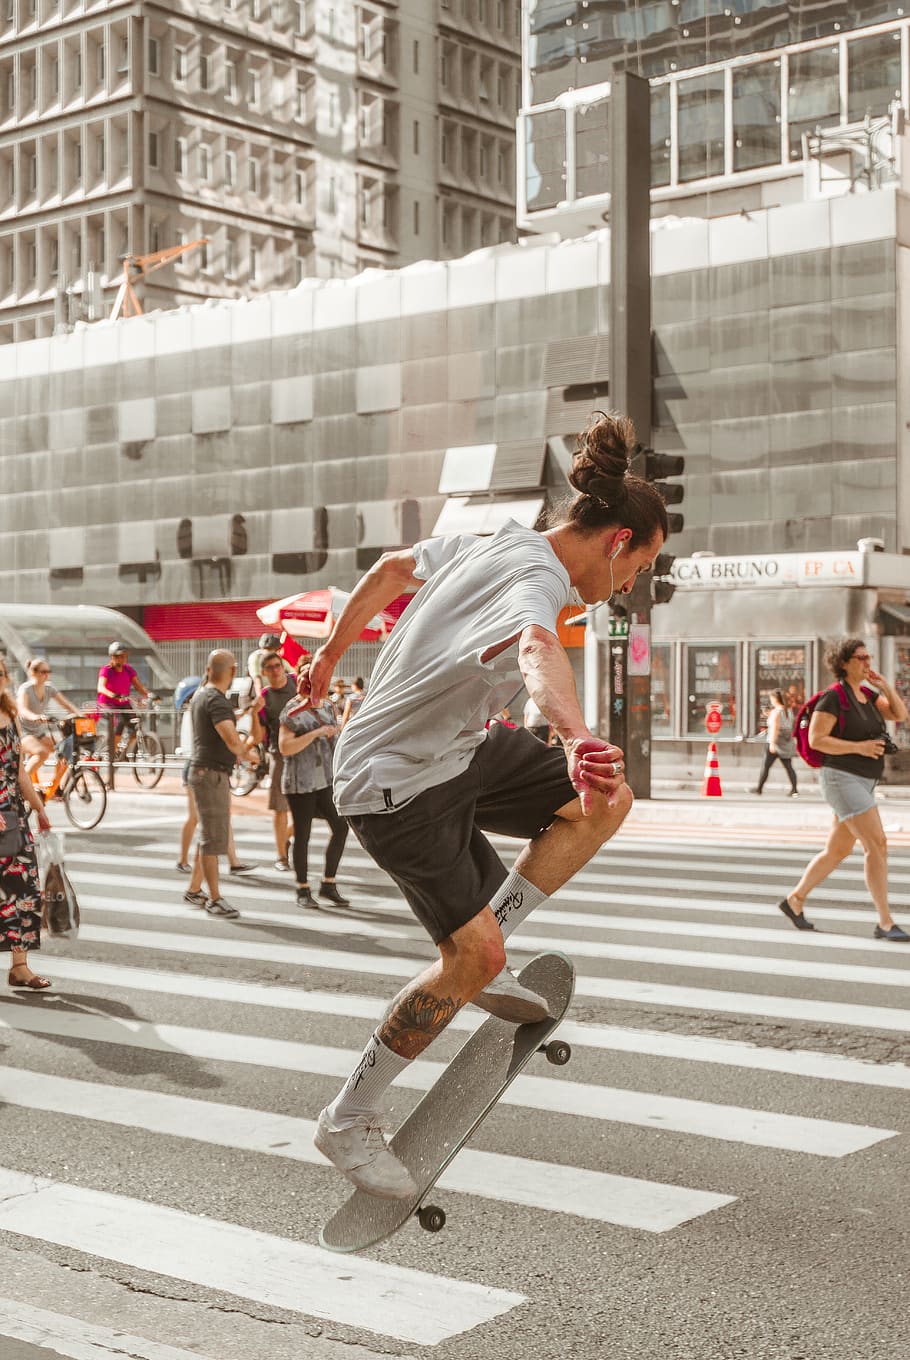 Photo of Man Riding Skateboard on Pedestrian, action, adult, crossing